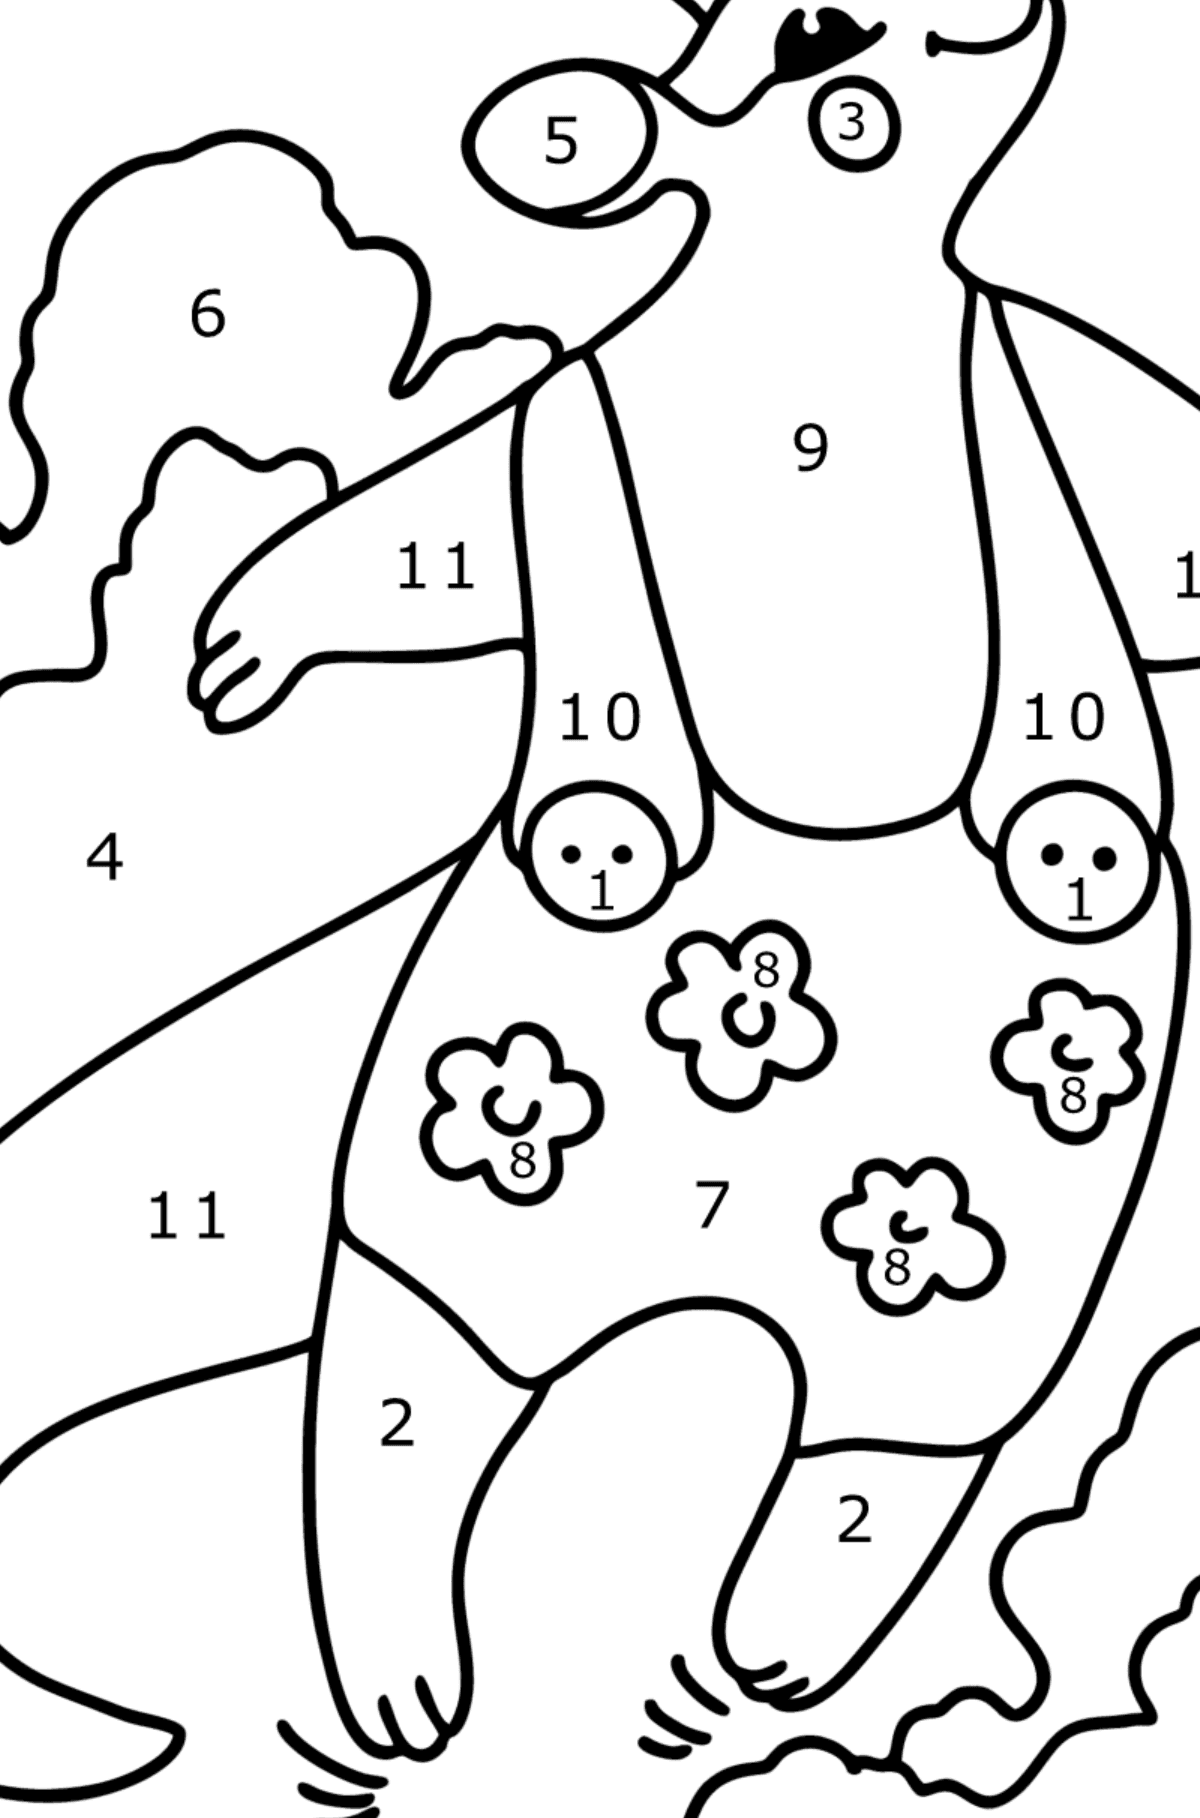 Coloring page - Cartoon Kangaroo jumping - Coloring by Numbers for Kids